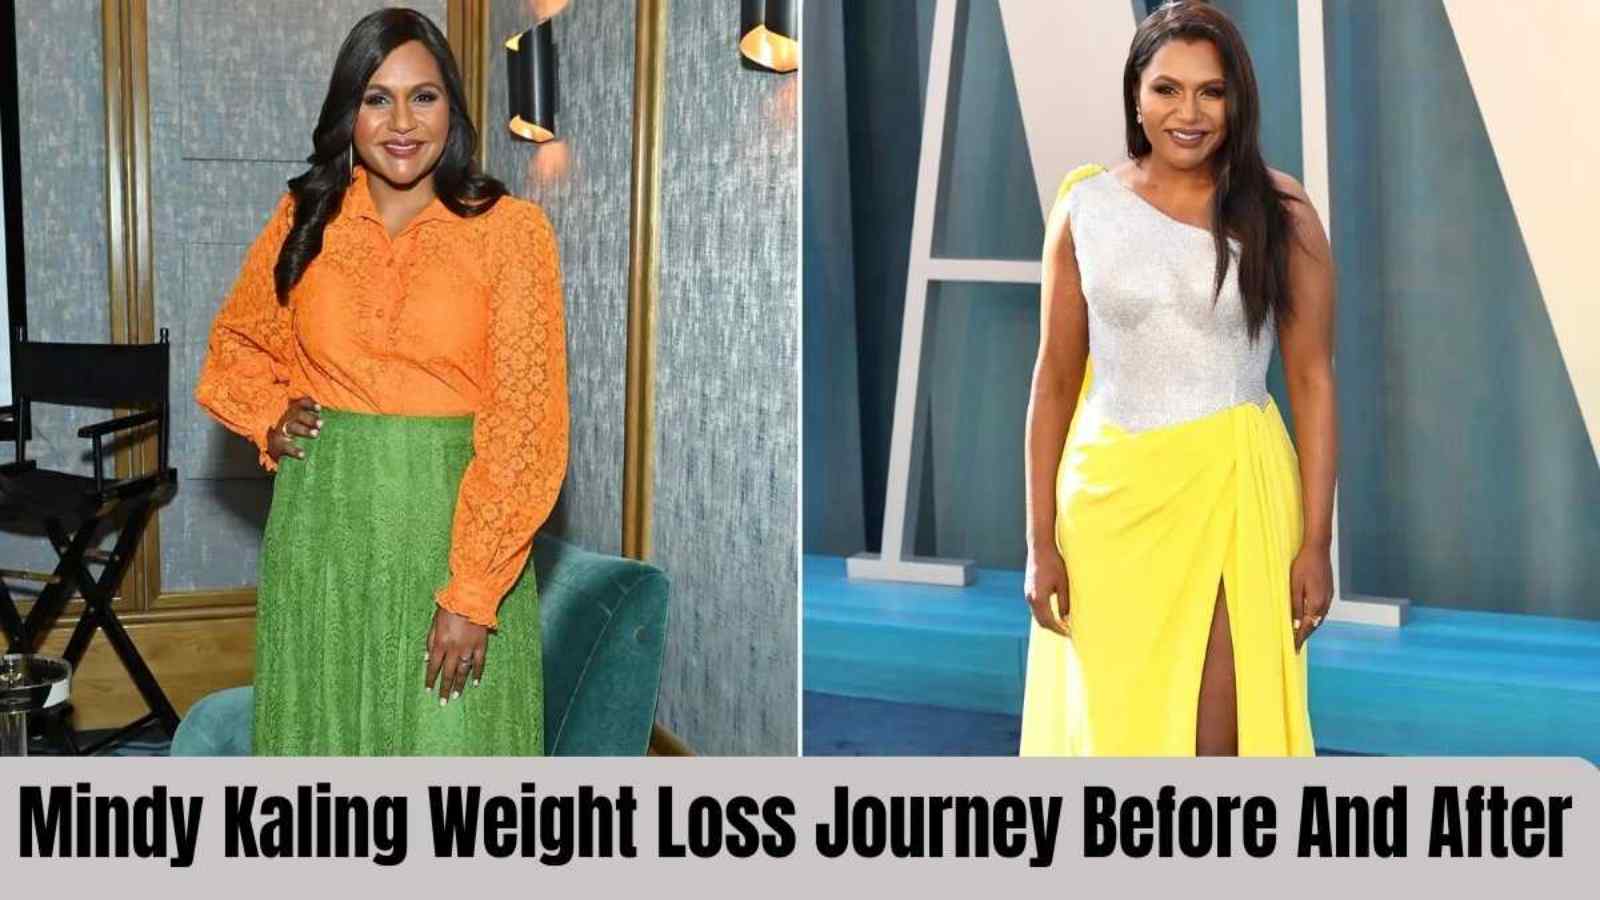 Mindy Kaling Weight Loss Journey Before and After Transformation